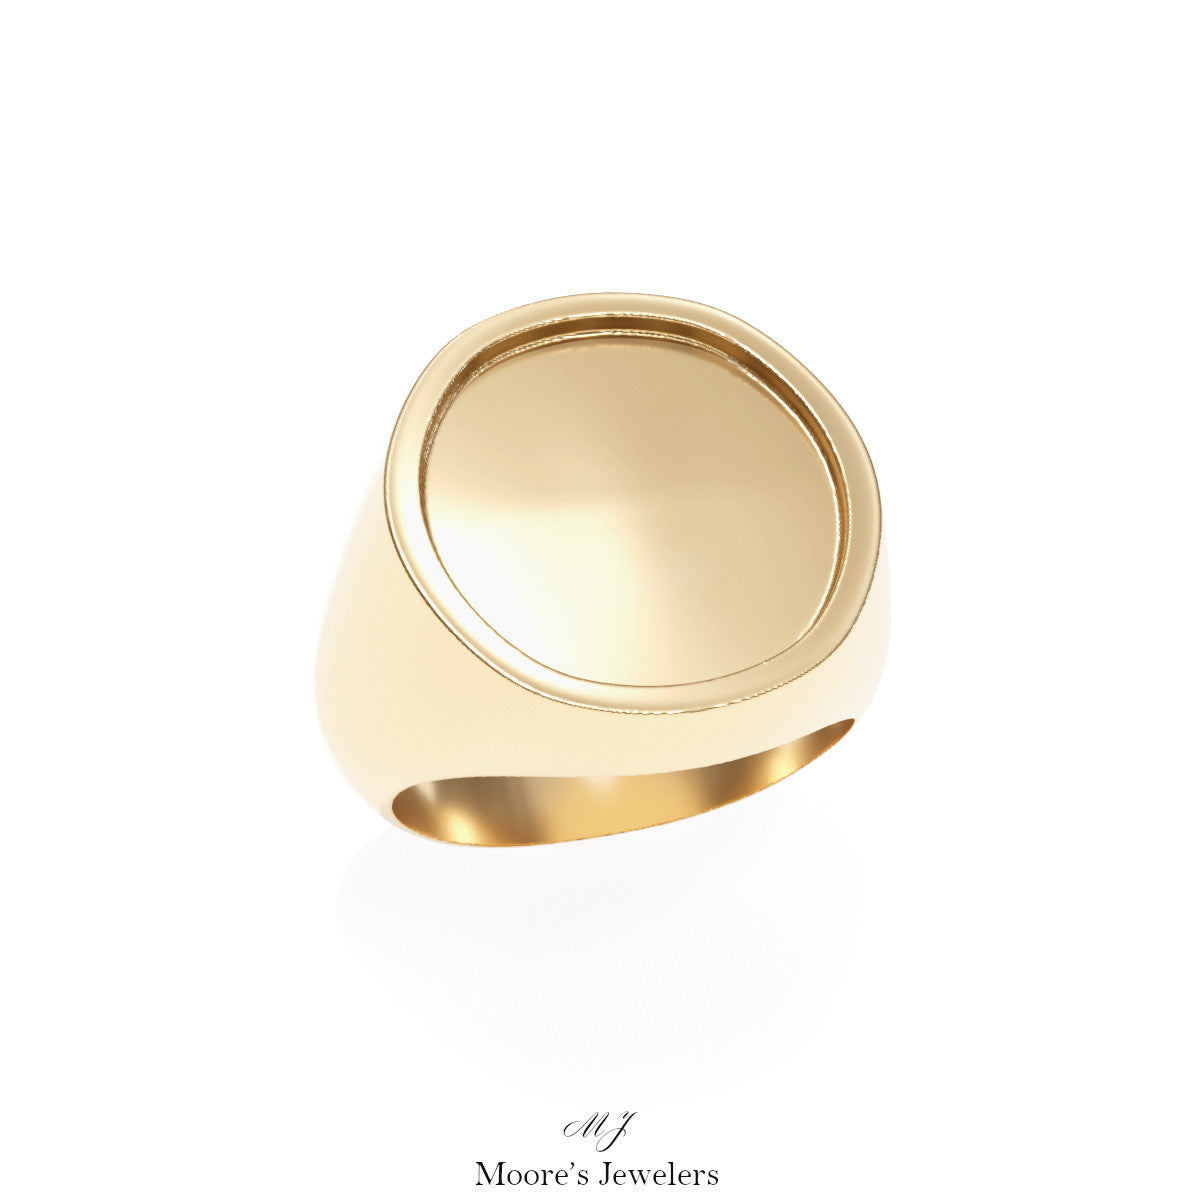 3D Printed gold ring with diamonds by bhrugs18 | Pinshape